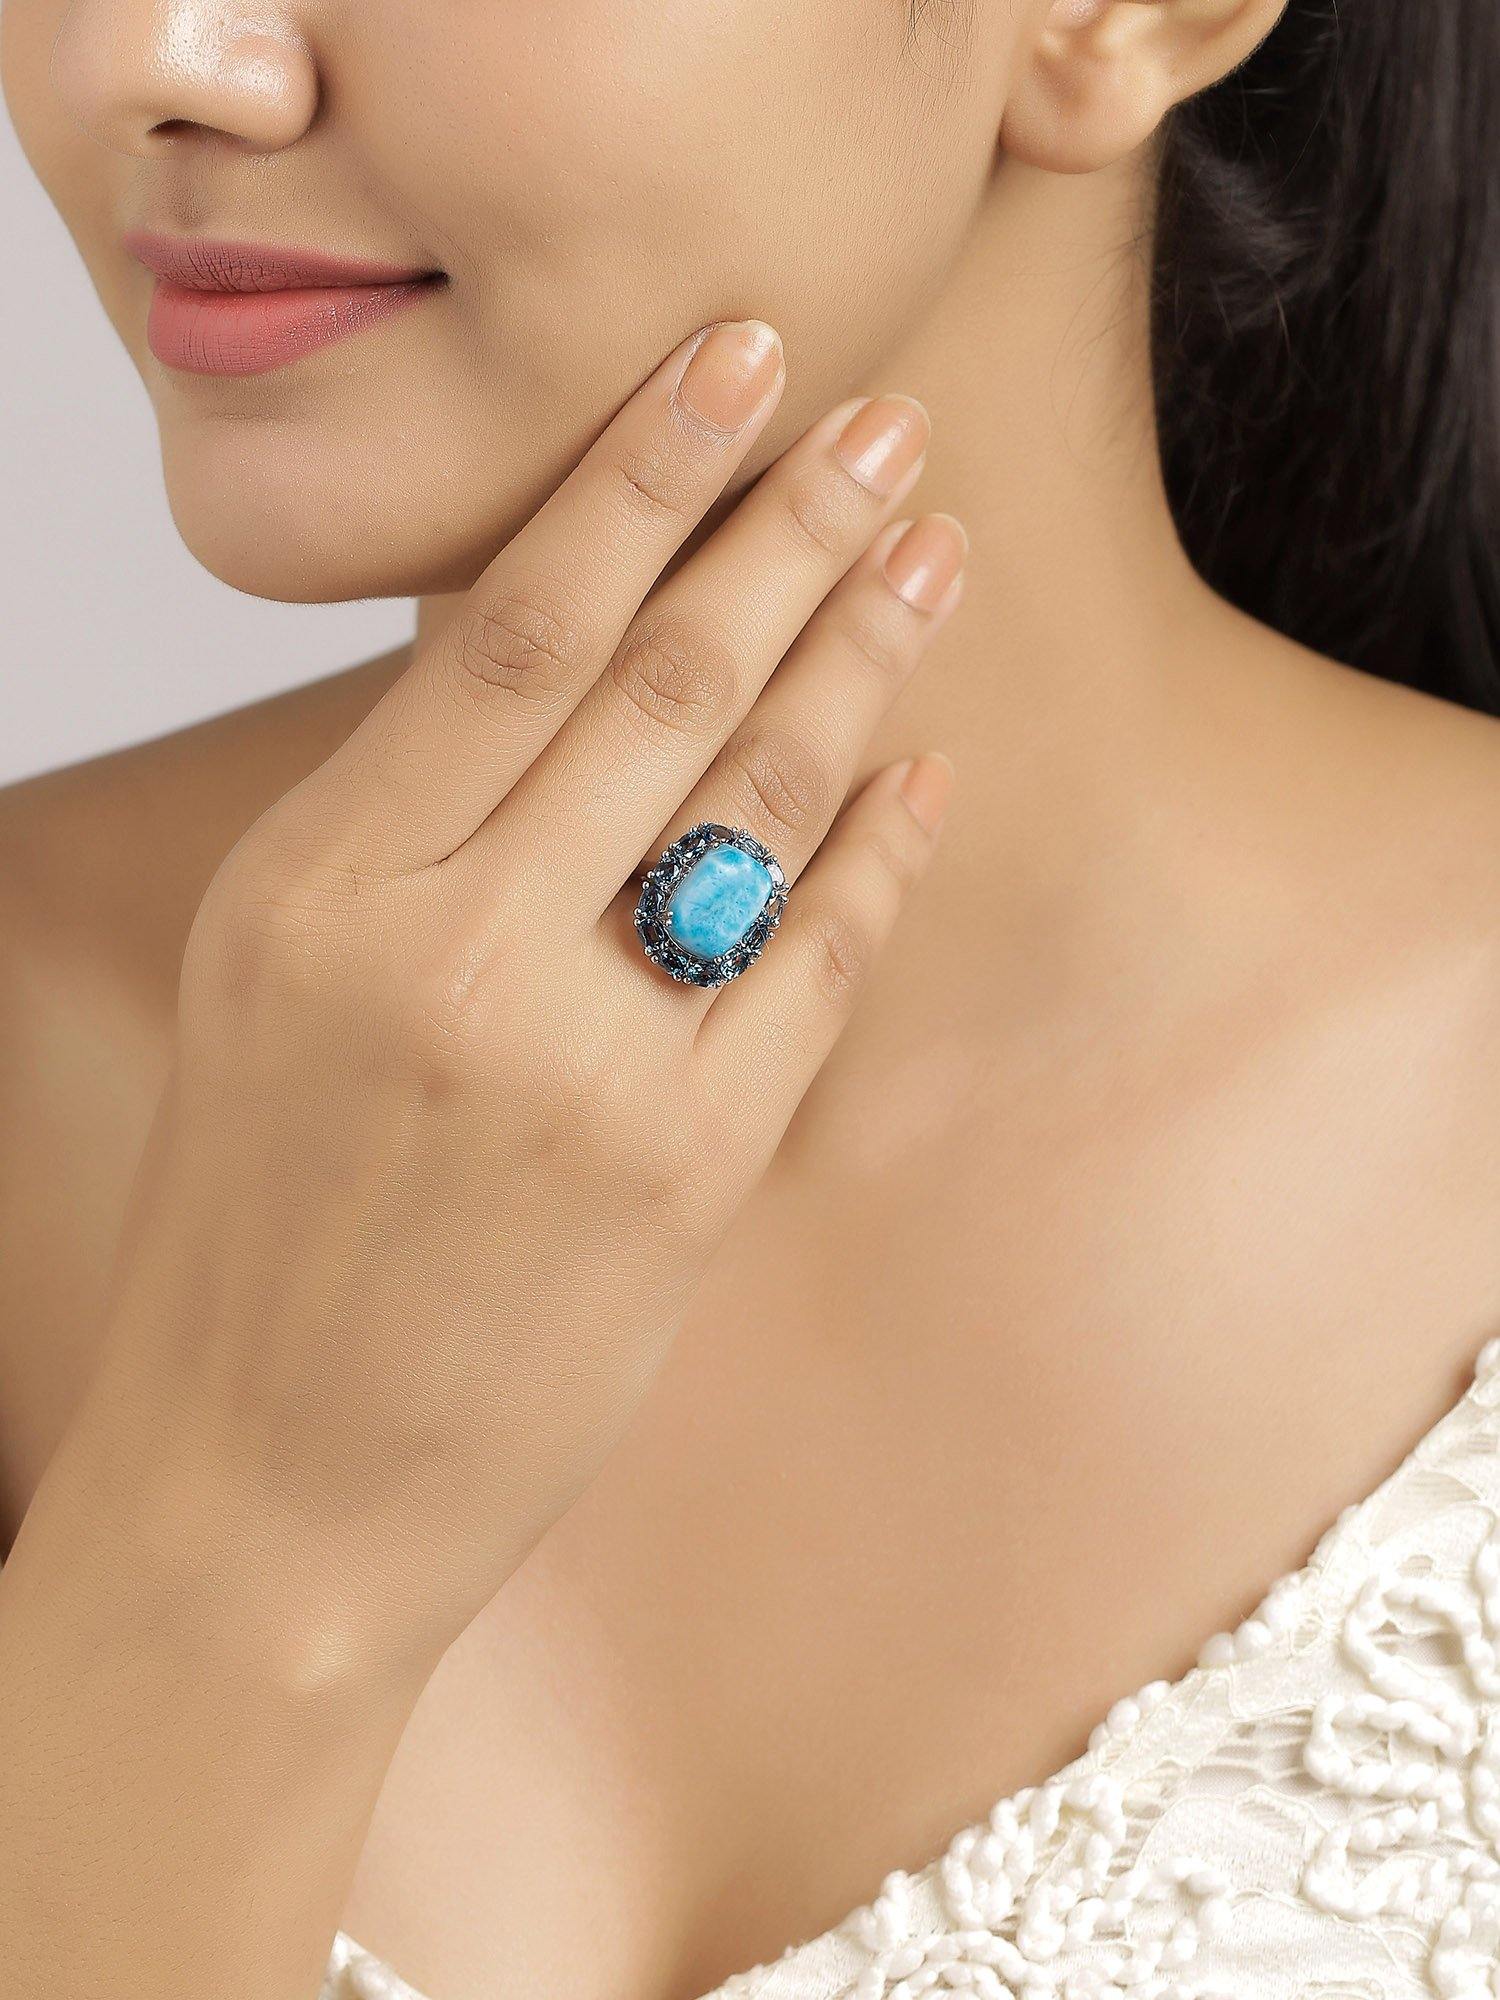 10.26 Ct. Larimar London Blue Topaz Solid 925 Sterling Silver Cluster Ring Jewelry - YoTreasure